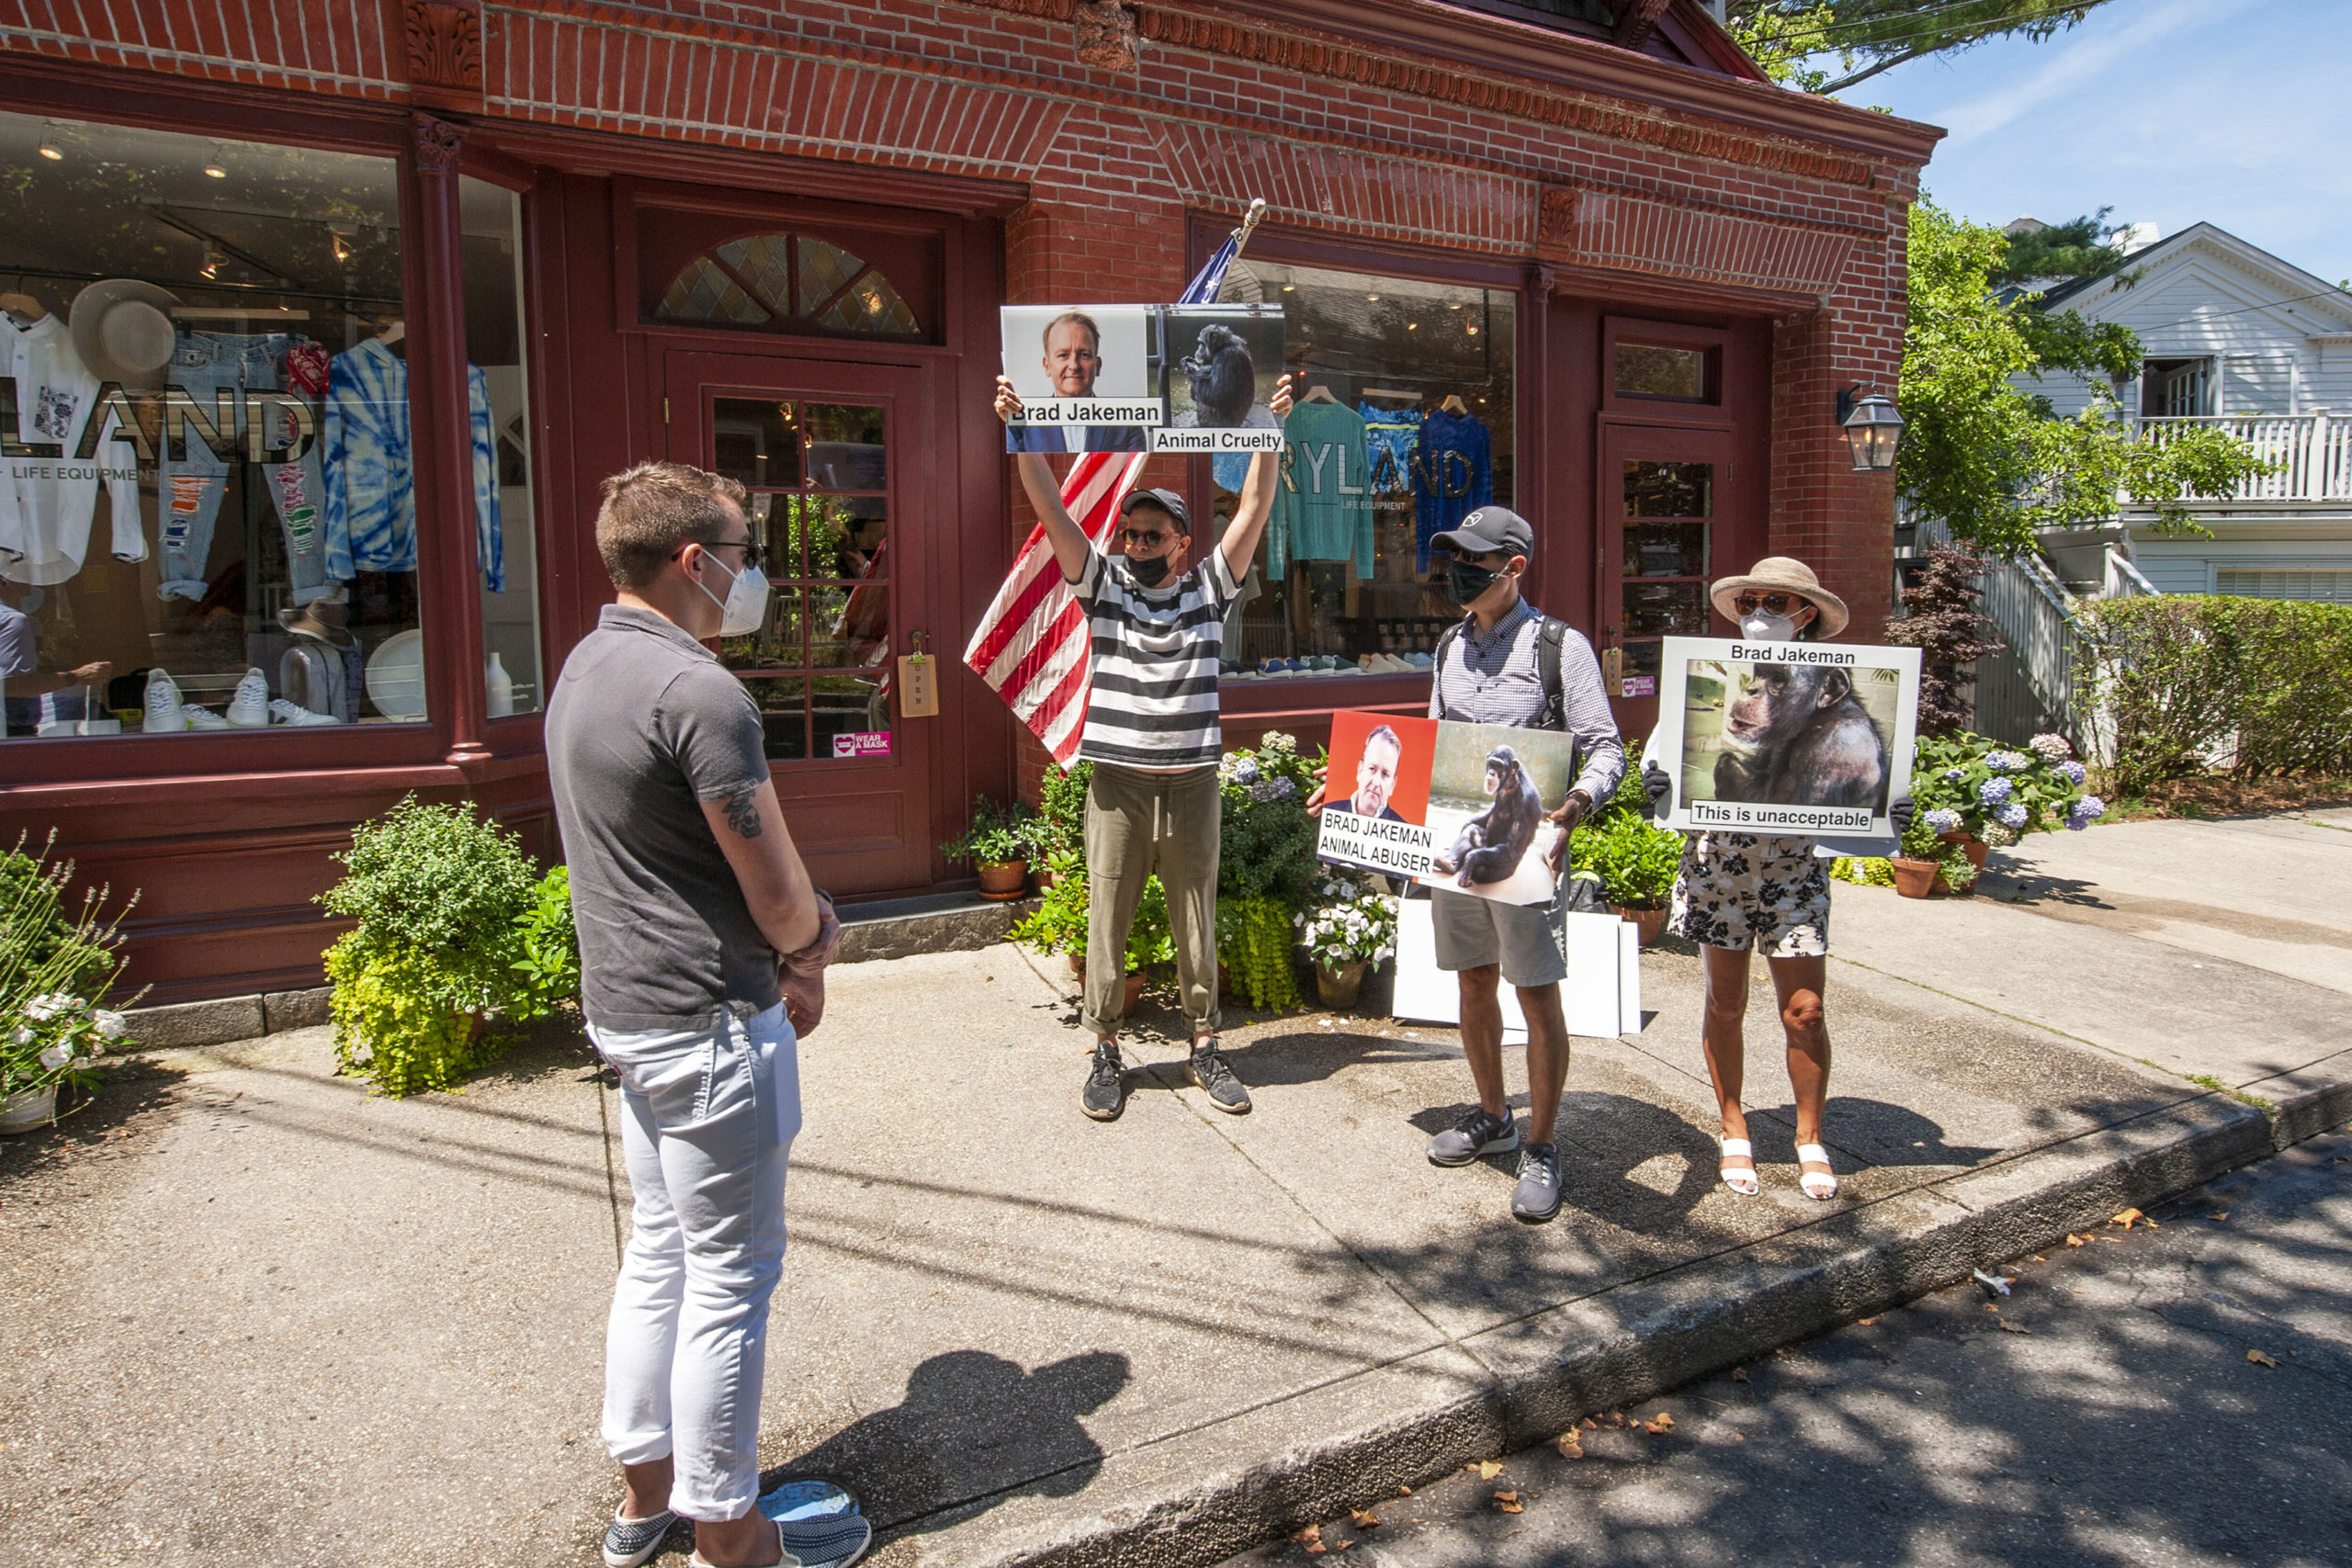 Protesters gathered on Madison Street in Sag Harbor on Saturday, July 25, demonstrating against mistreatment of chimpanzees at a Georgia sancturary. MICHAEL HELLER